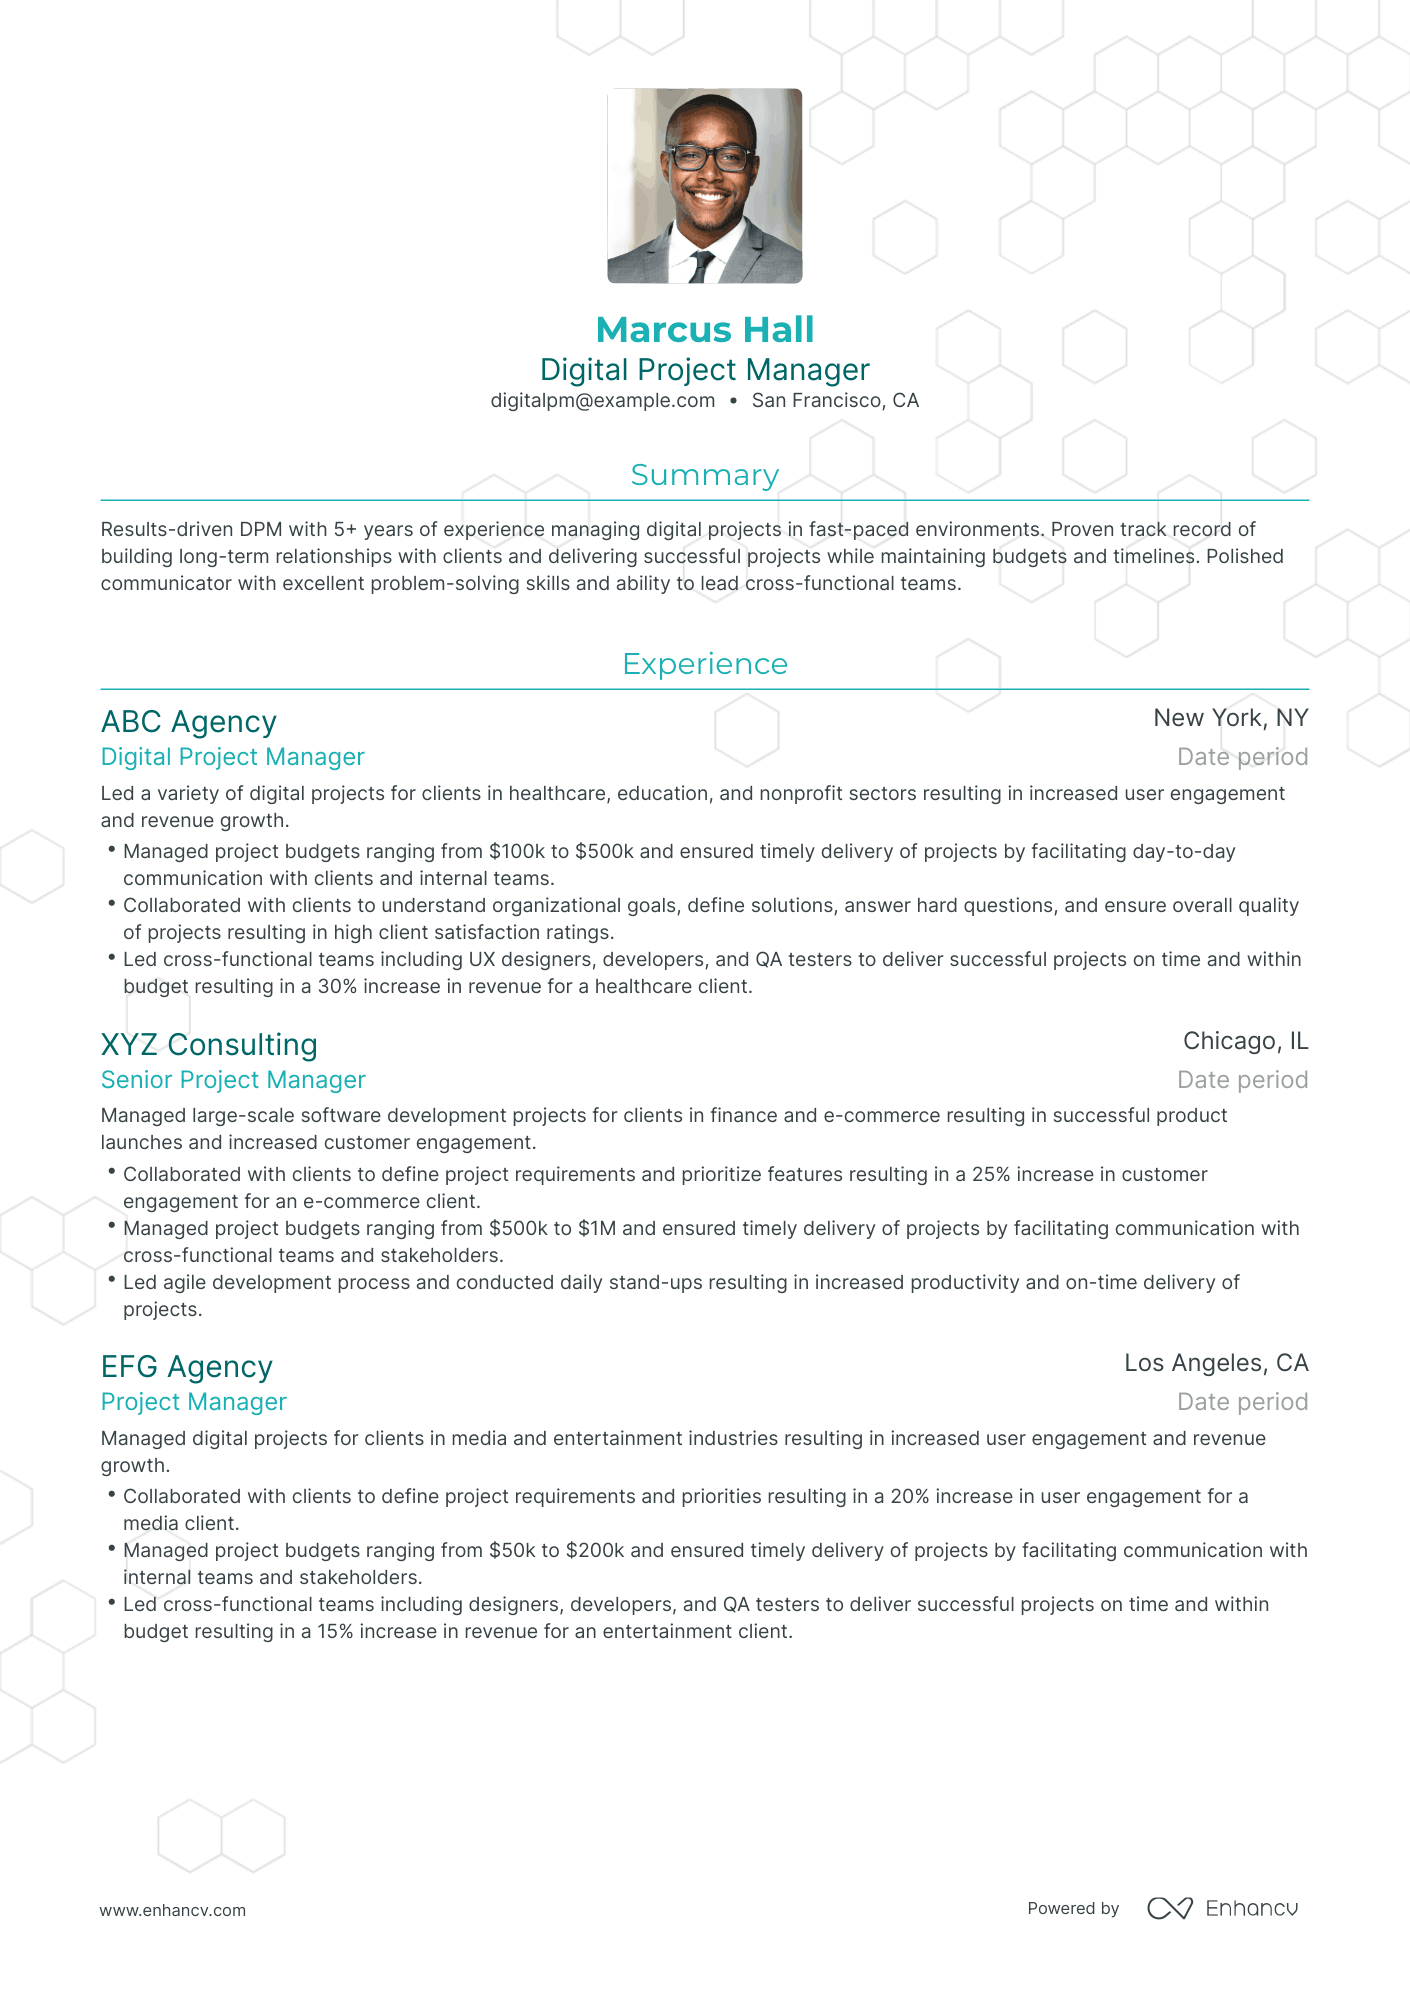 Traditional Digital Project Manager Resume Template